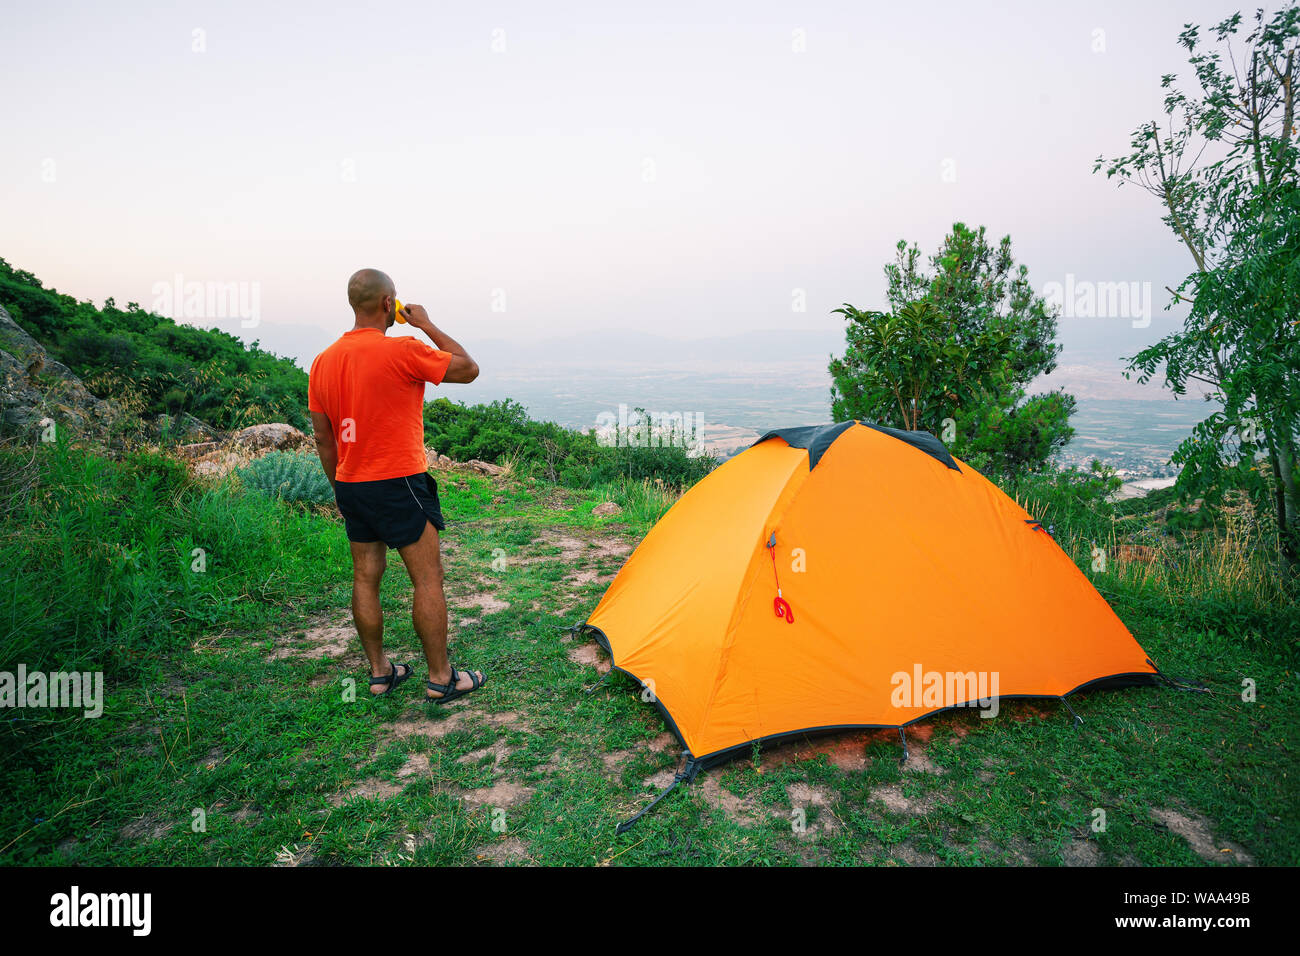 Man is drinking from cup near an orange tent standing on hill Stock Photo